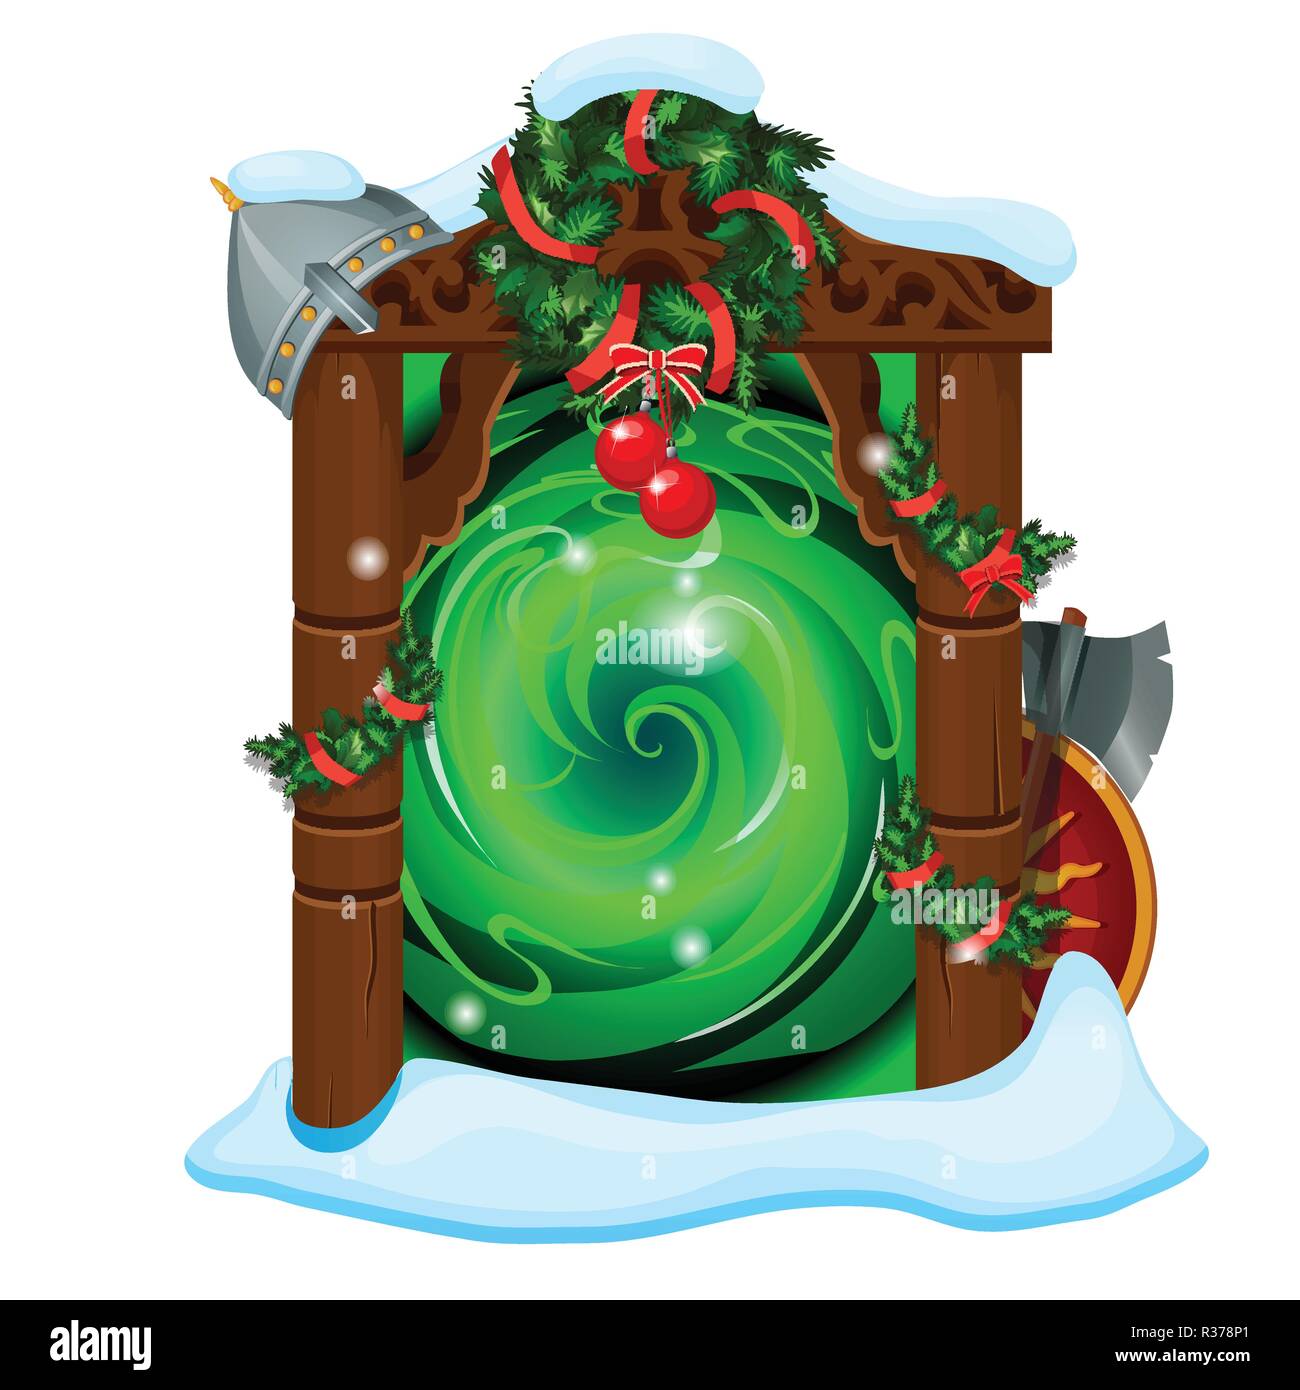 Opened portal with wooden frame decorated with Christmas and New Year baubles isolated on white background. Sample of poster, party invitation, greeting card. Vector cartoon close-up illustration. Stock Vector